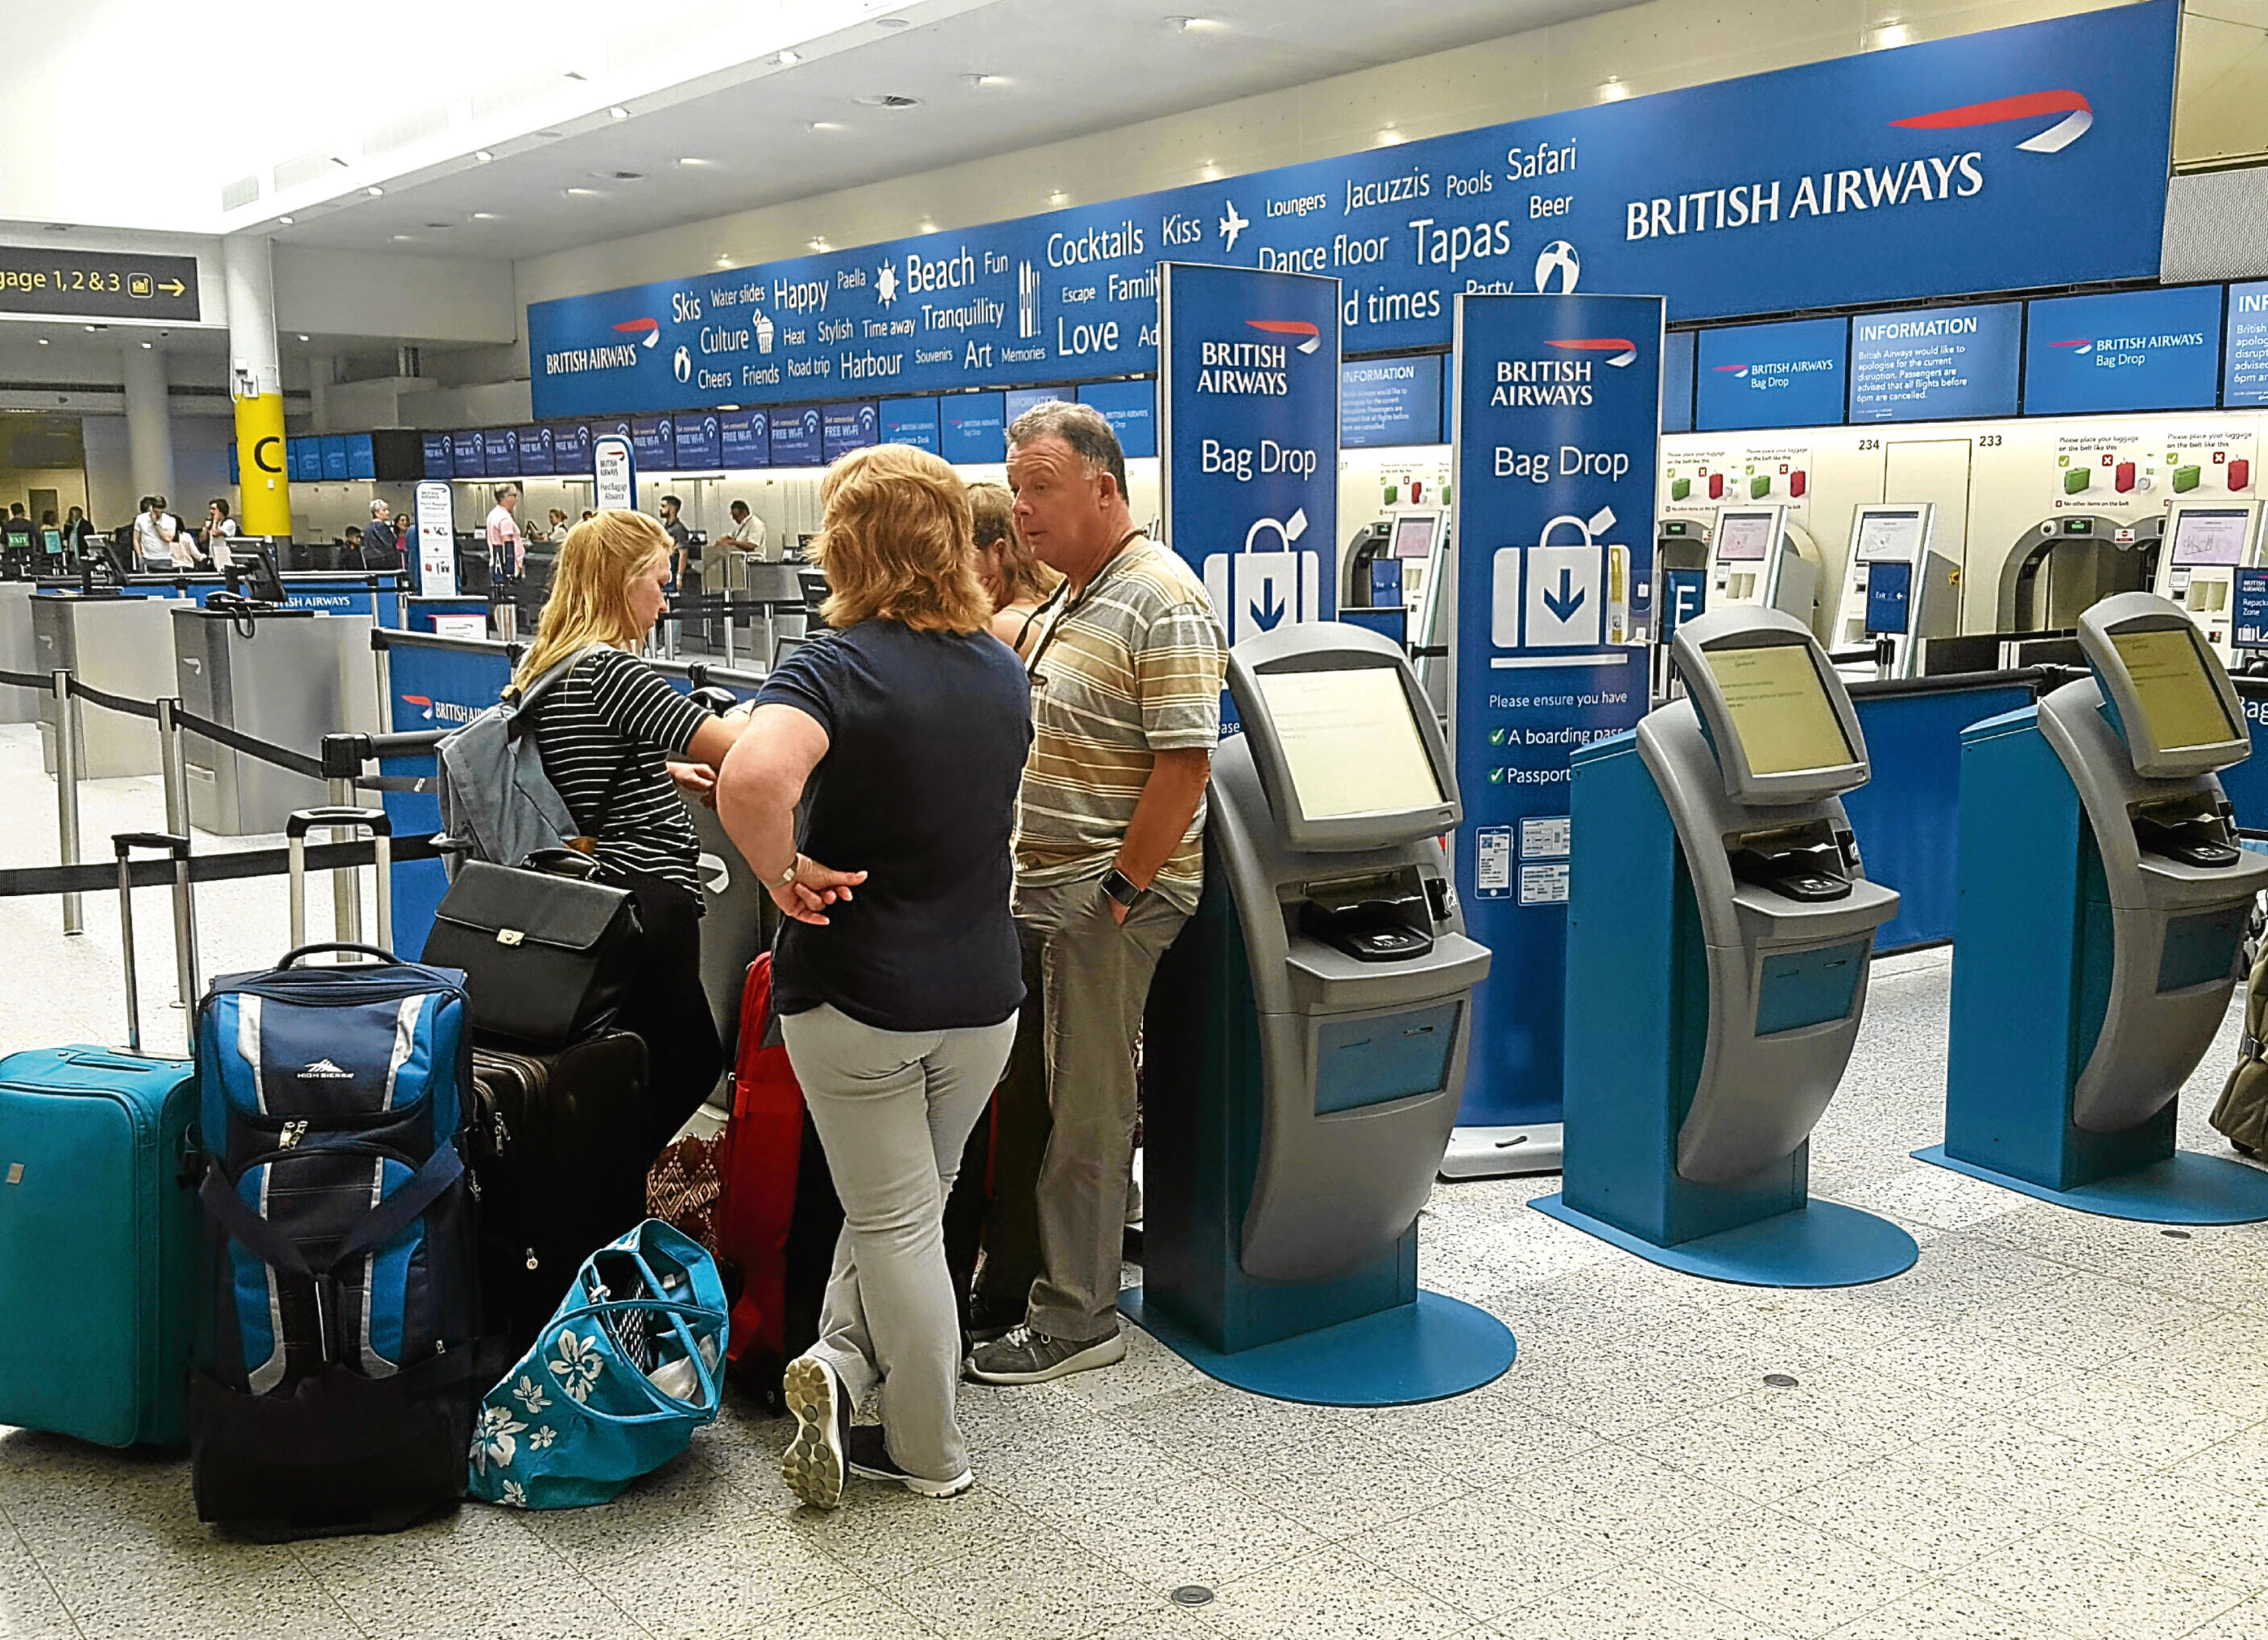 Passengers at the British Airways check-in desk at Gatwick Airport. The airline says it has cancelled all flights leaving from Heathrow and Gatwick for the rest of today because of a "major IT system failure". (Gareth Fuller/PA Wire)